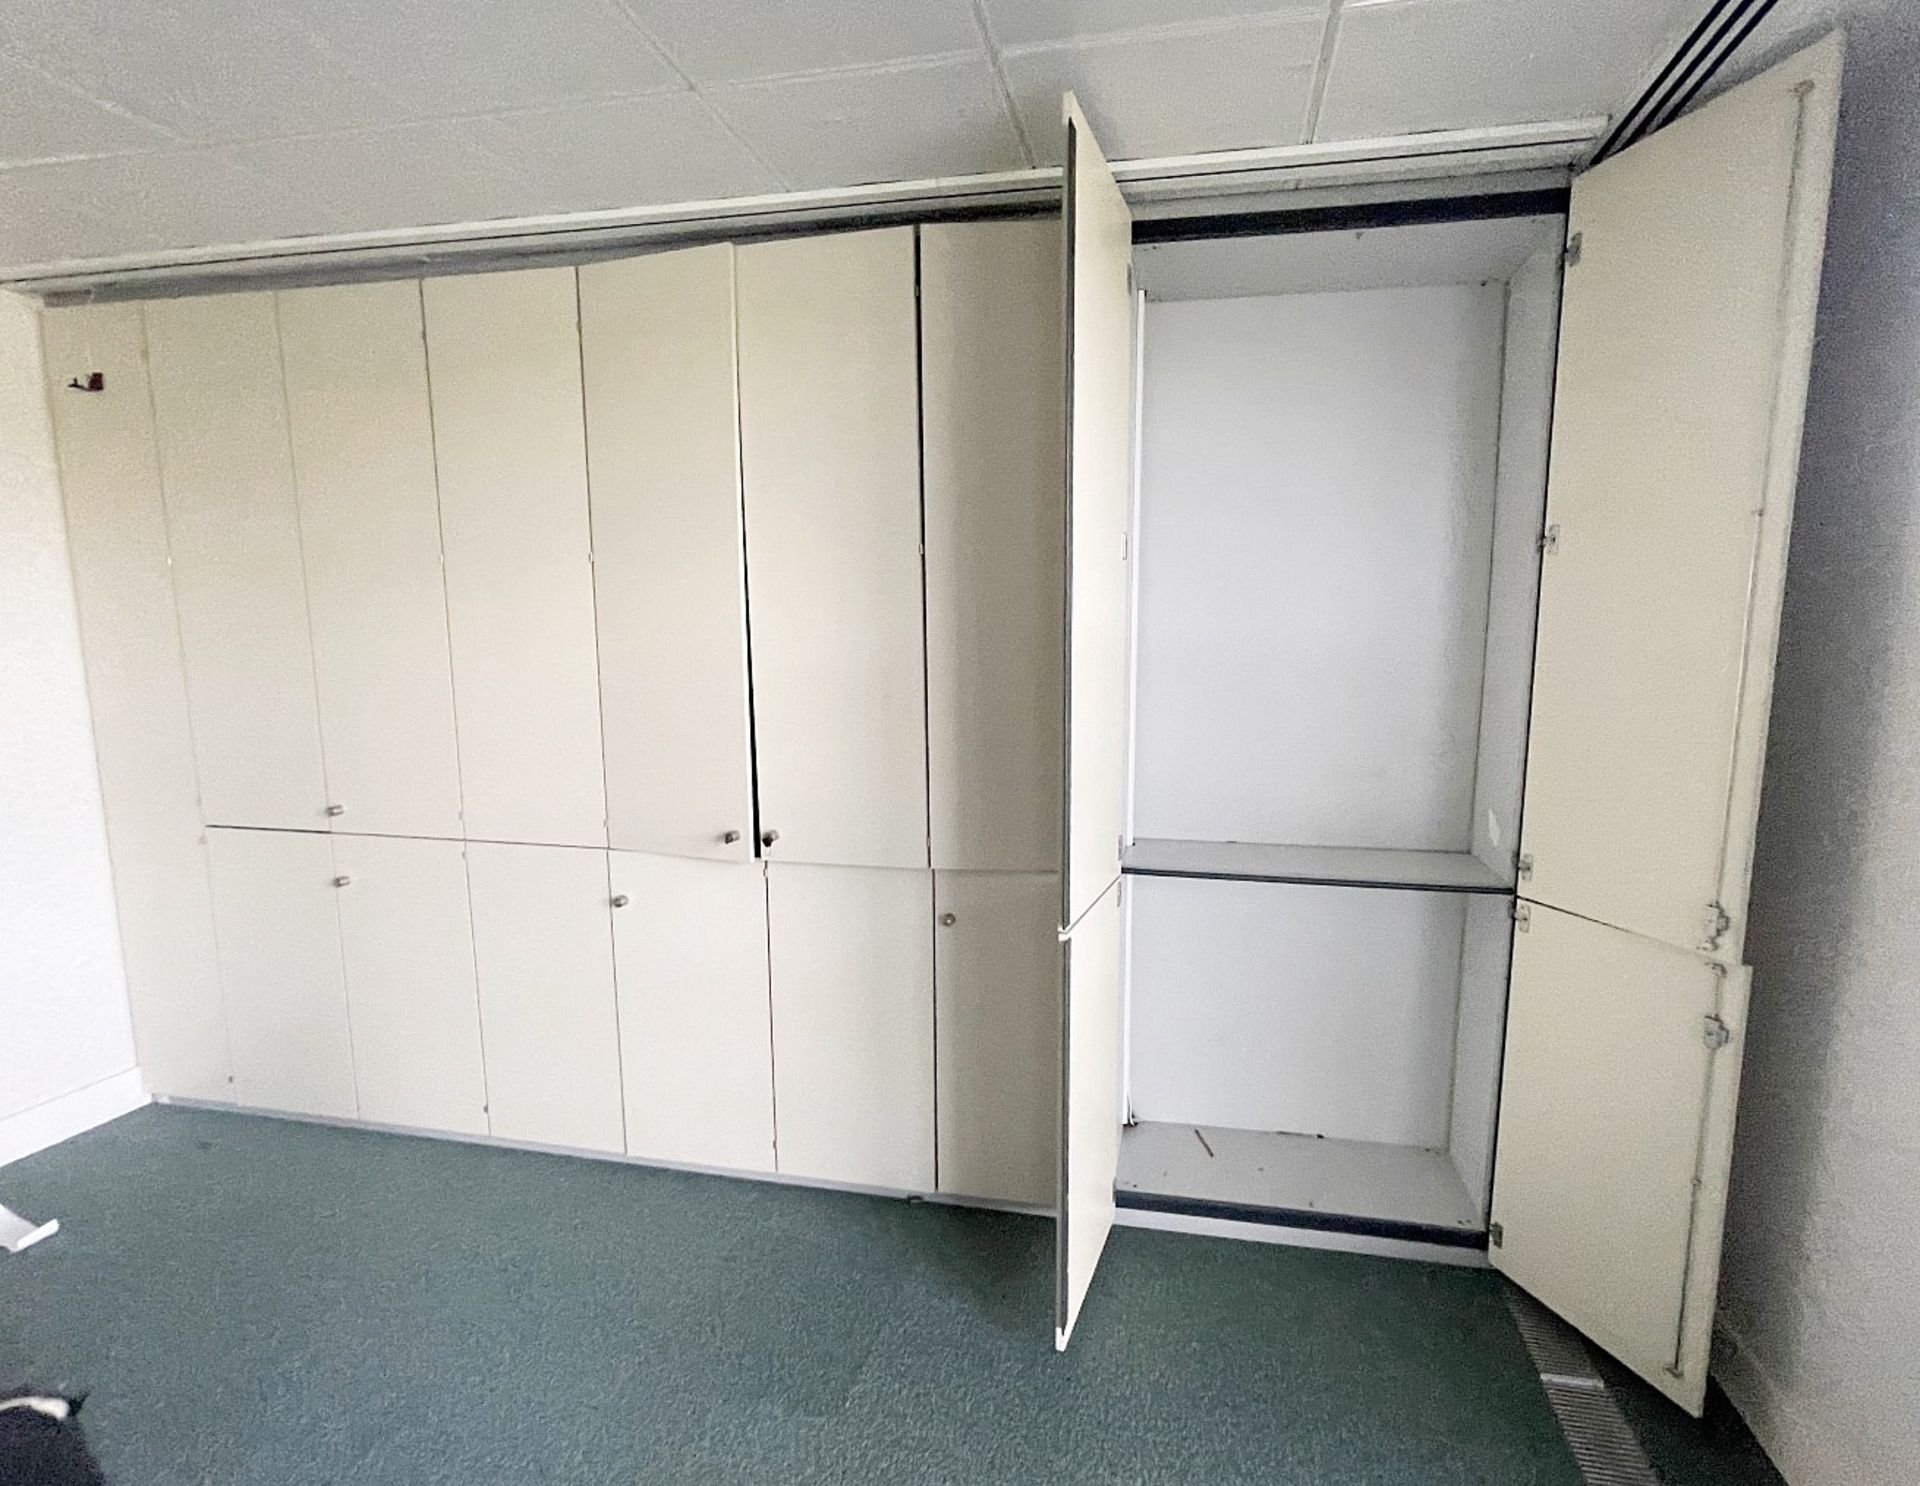 4.8 Metre Wide Bank Of Wall Storage Units - Ref: ED167C - To Be Removed From An Executive Office - Image 5 of 5